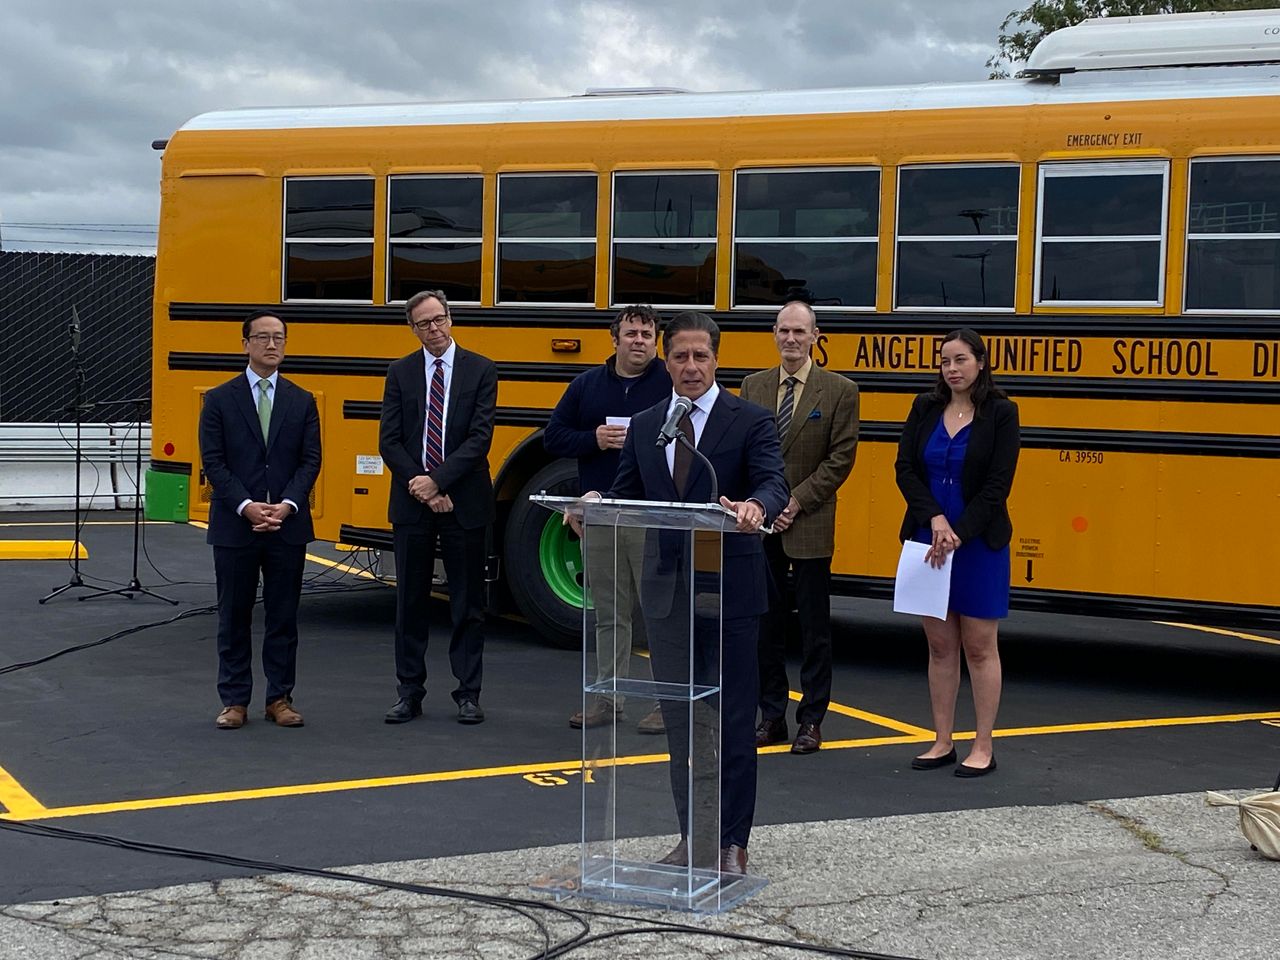 lausd-sun-valley-bus-yard-will-be-all-electric-by-2026